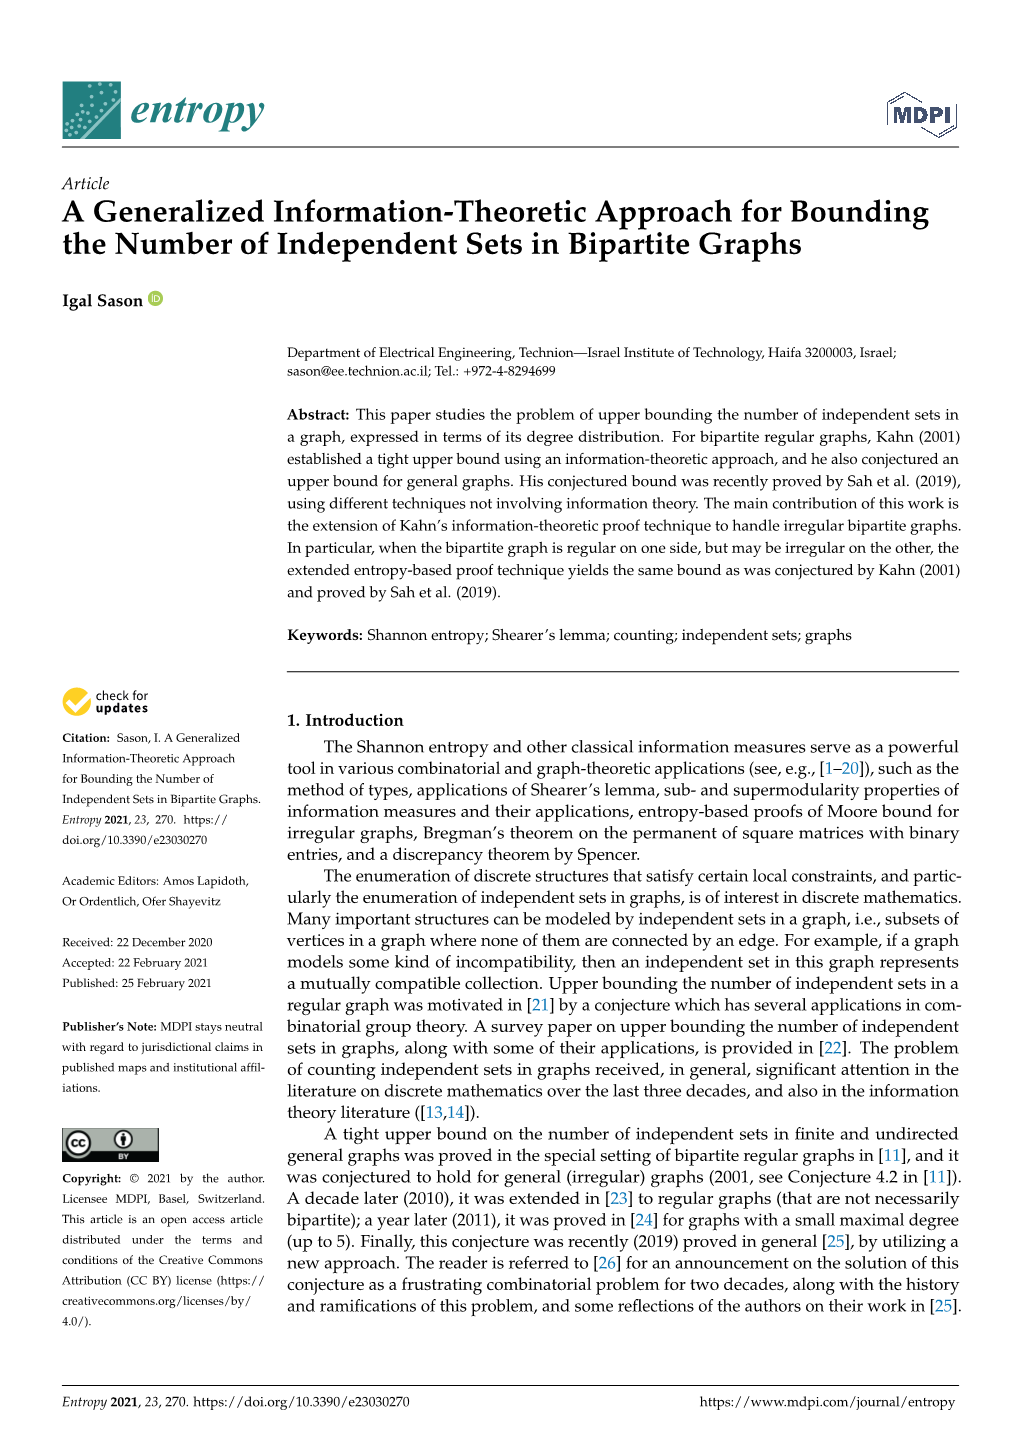 A Generalized Information-Theoretic Approach for Bounding the Number of Independent Sets in Bipartite Graphs